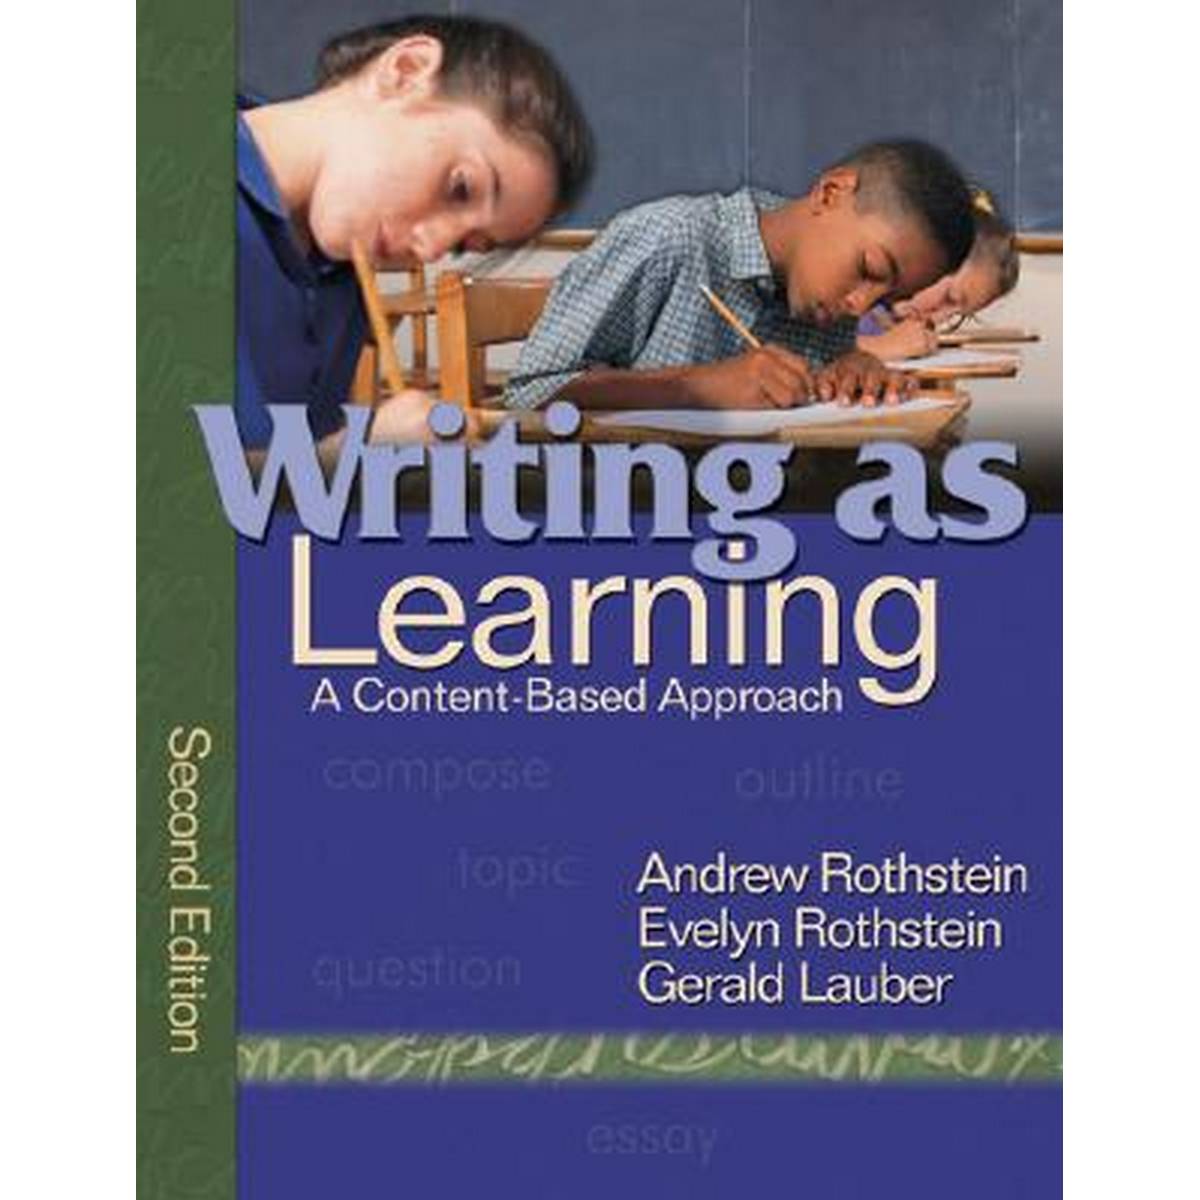 Writing as Learning: A Content-Based Approach - Second Edition